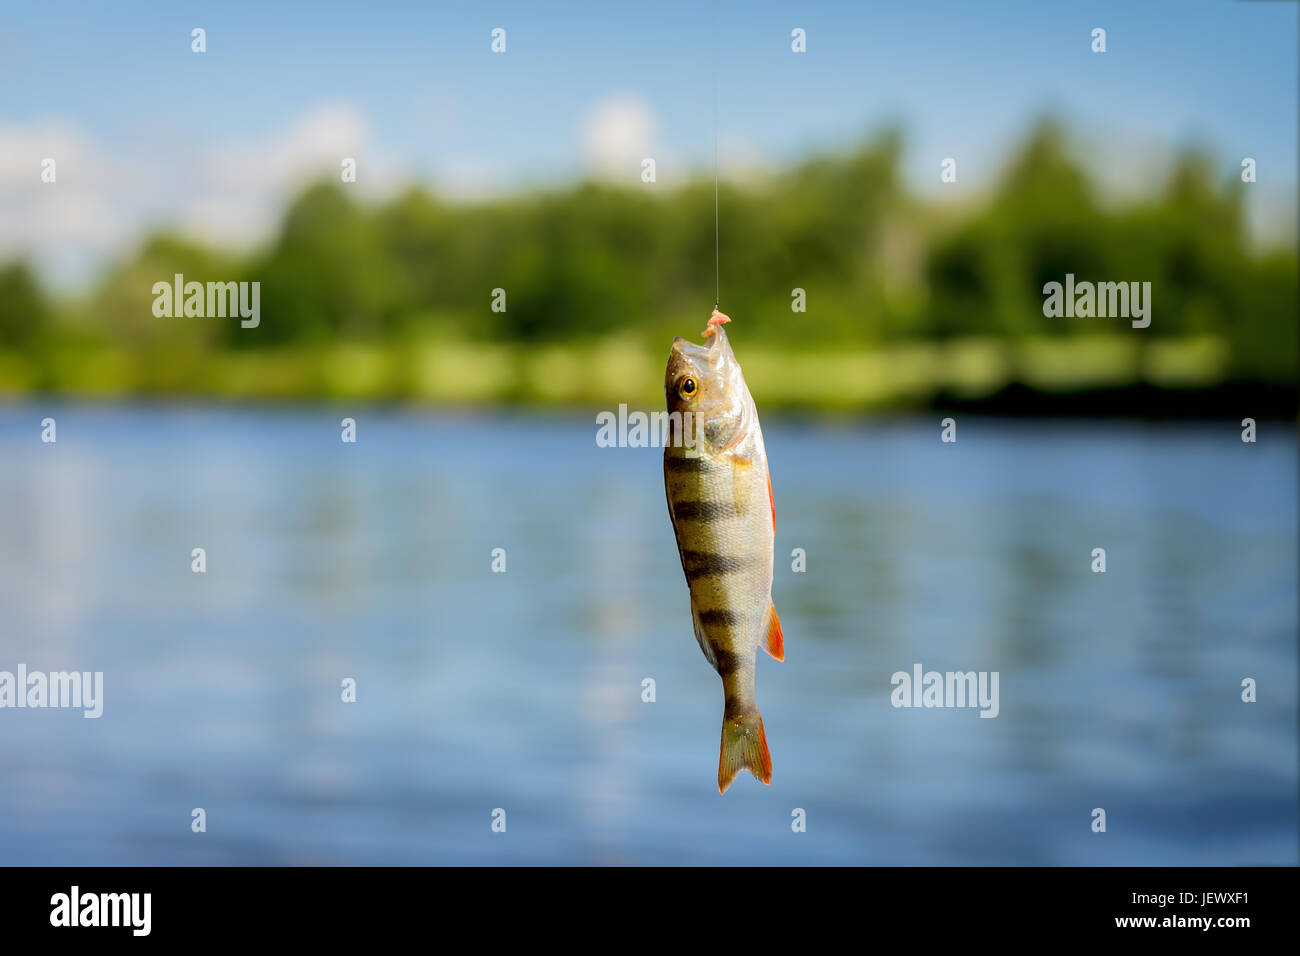 Bright beautiful caught fish of perch, hanging on hook with bait on background of natural landscape of water, sky, forests. Copy Space. Lots of place for text around Stock Photo